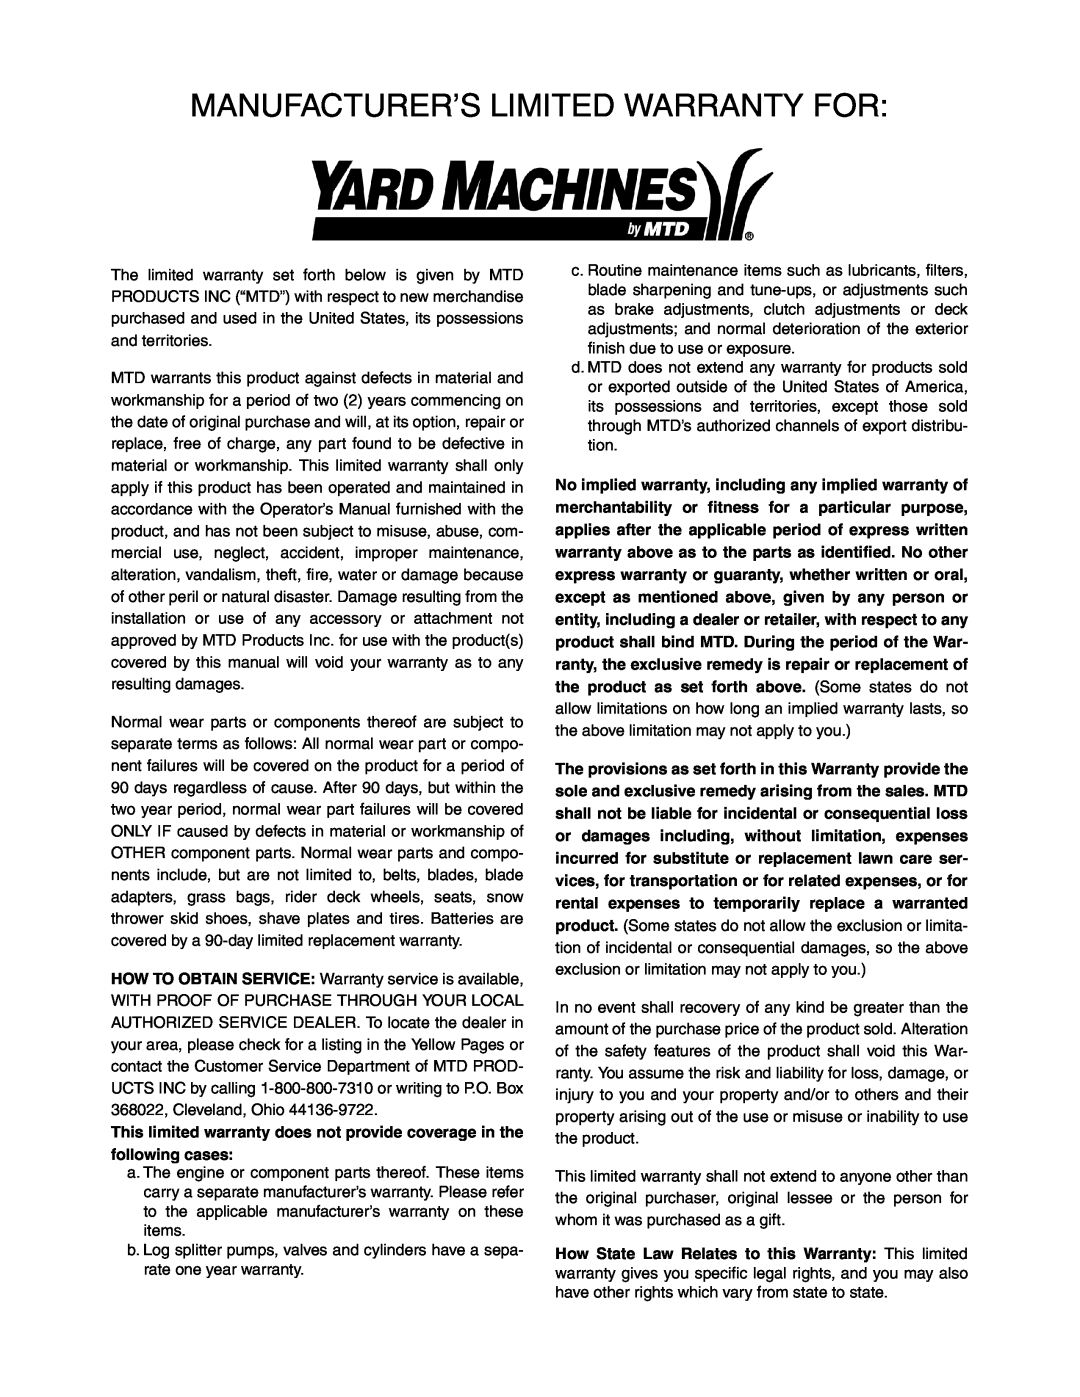 Yard Machines 30 manual Manufacturer’S Limited Warranty For 